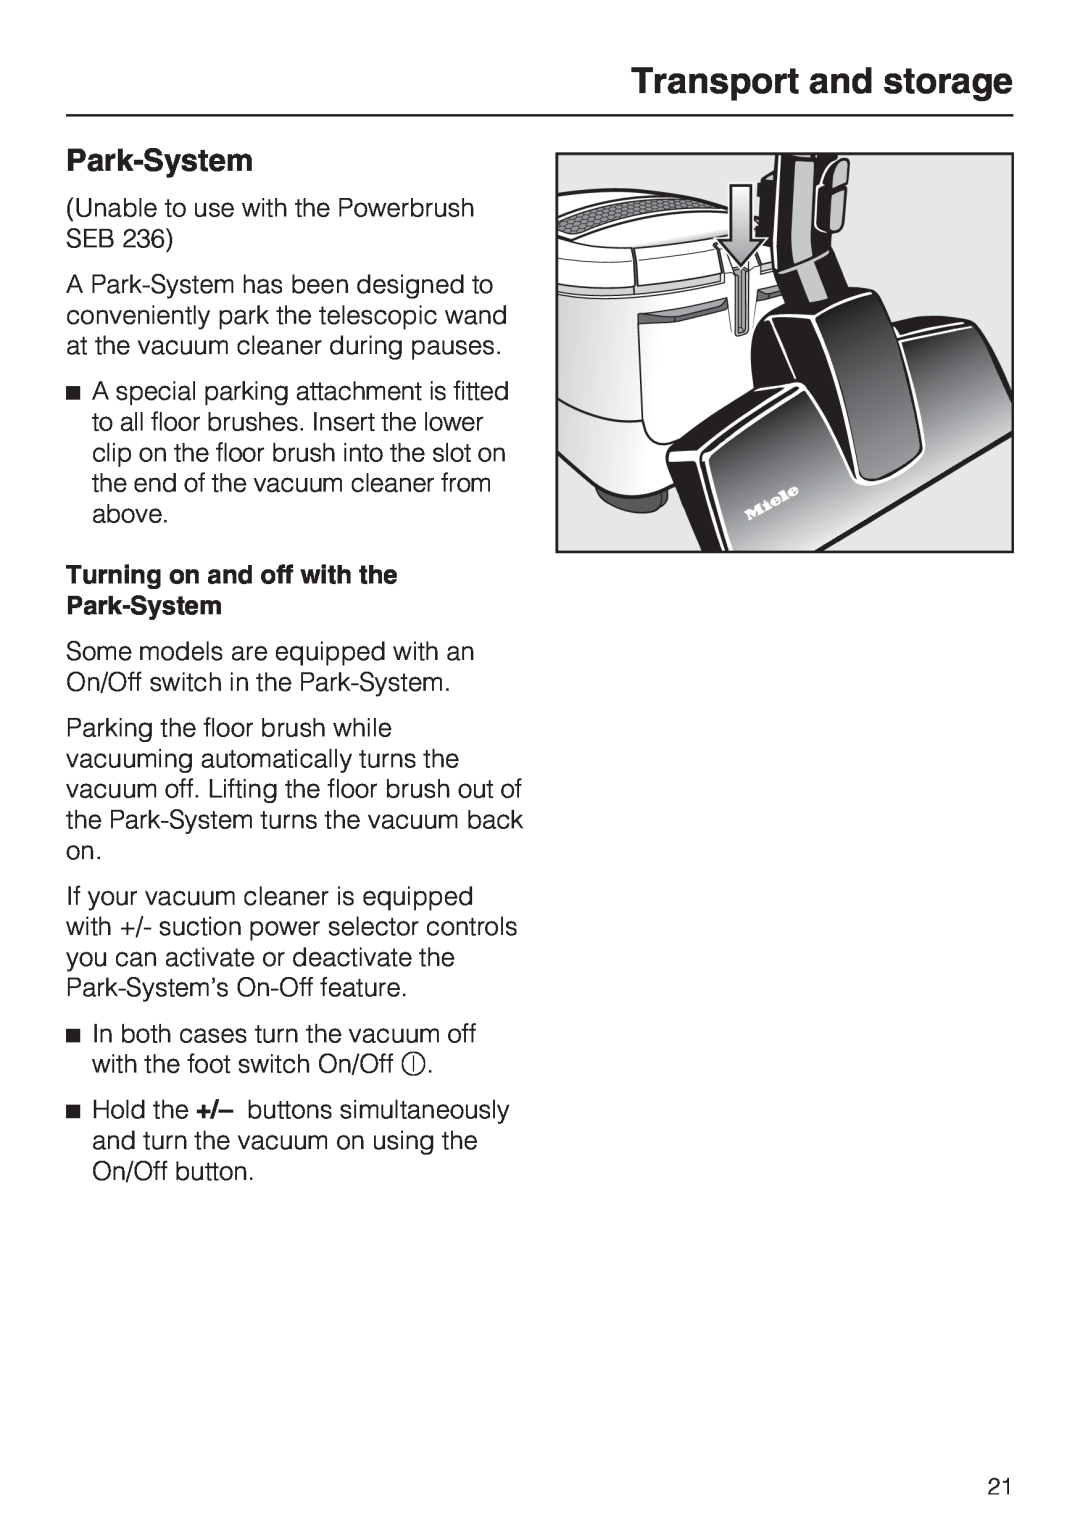 NEC S 5000 operating instructions Transport and storage, Park-System 